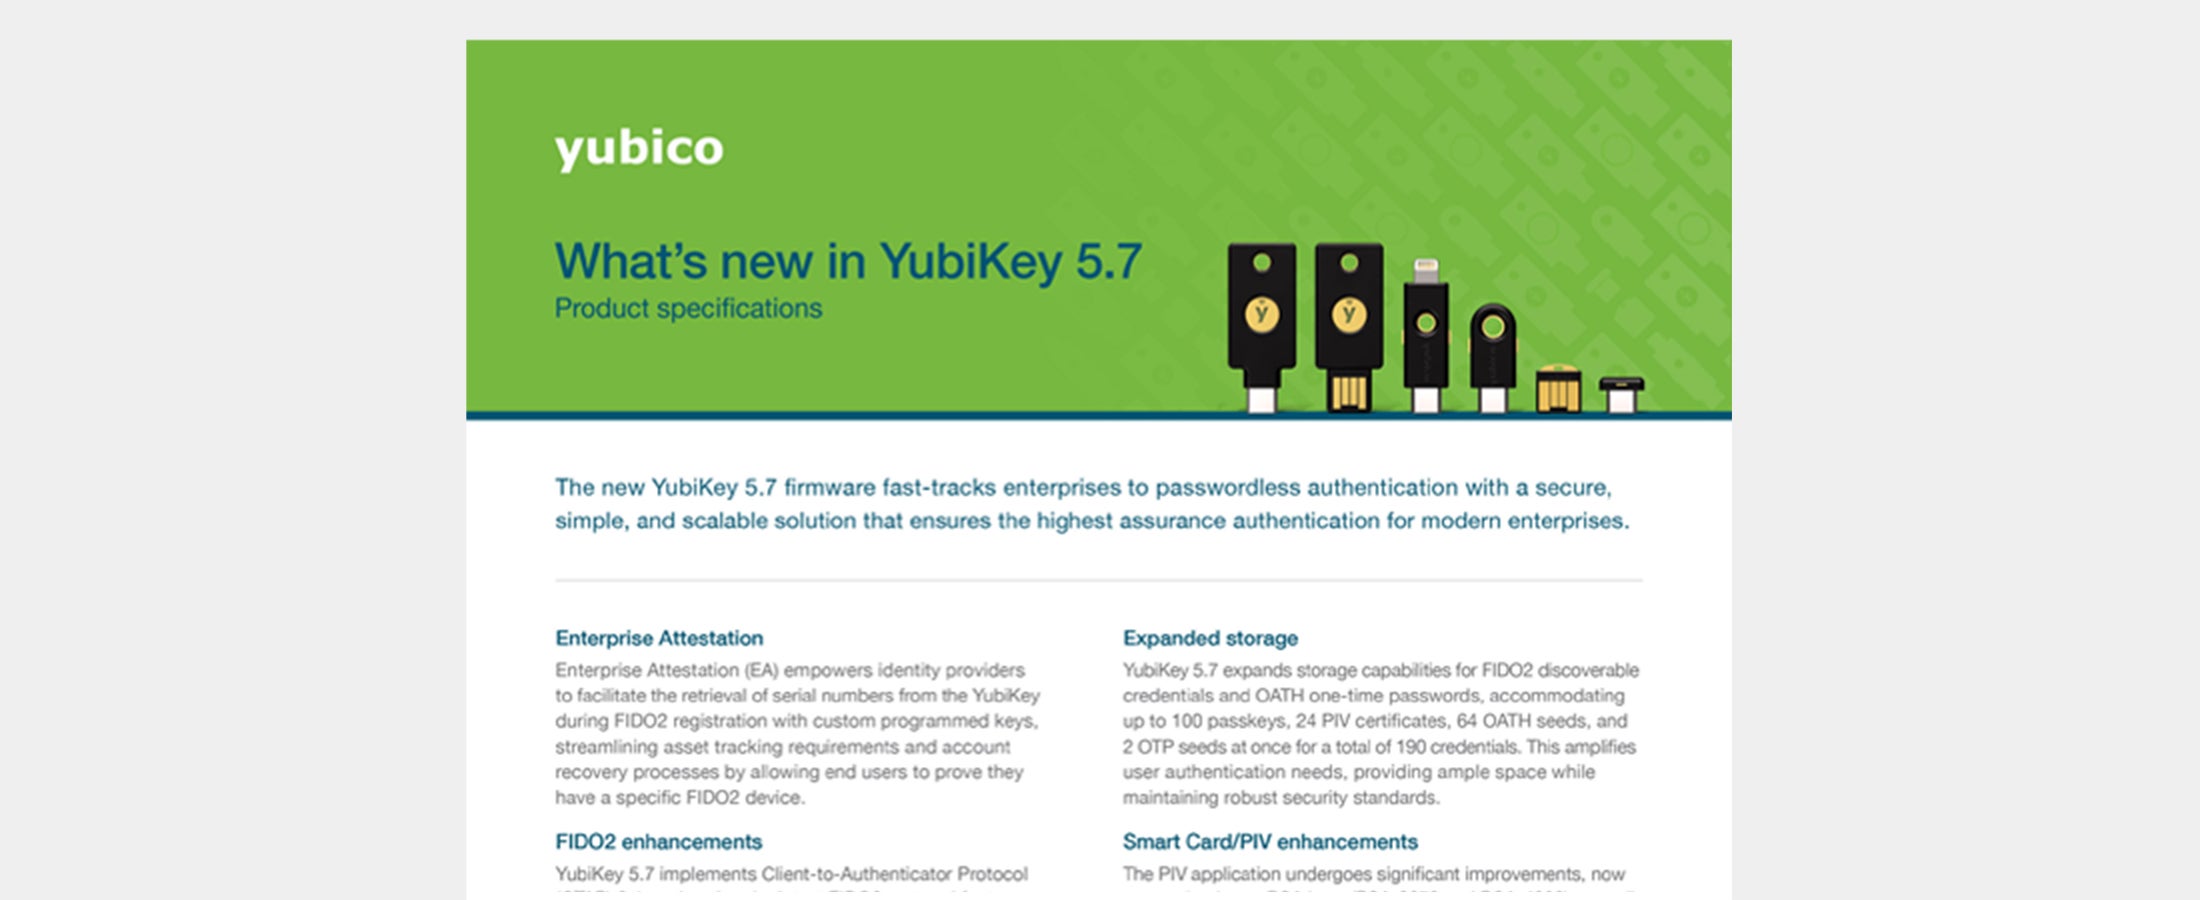 What's new in YubiKey 5.7 cover image